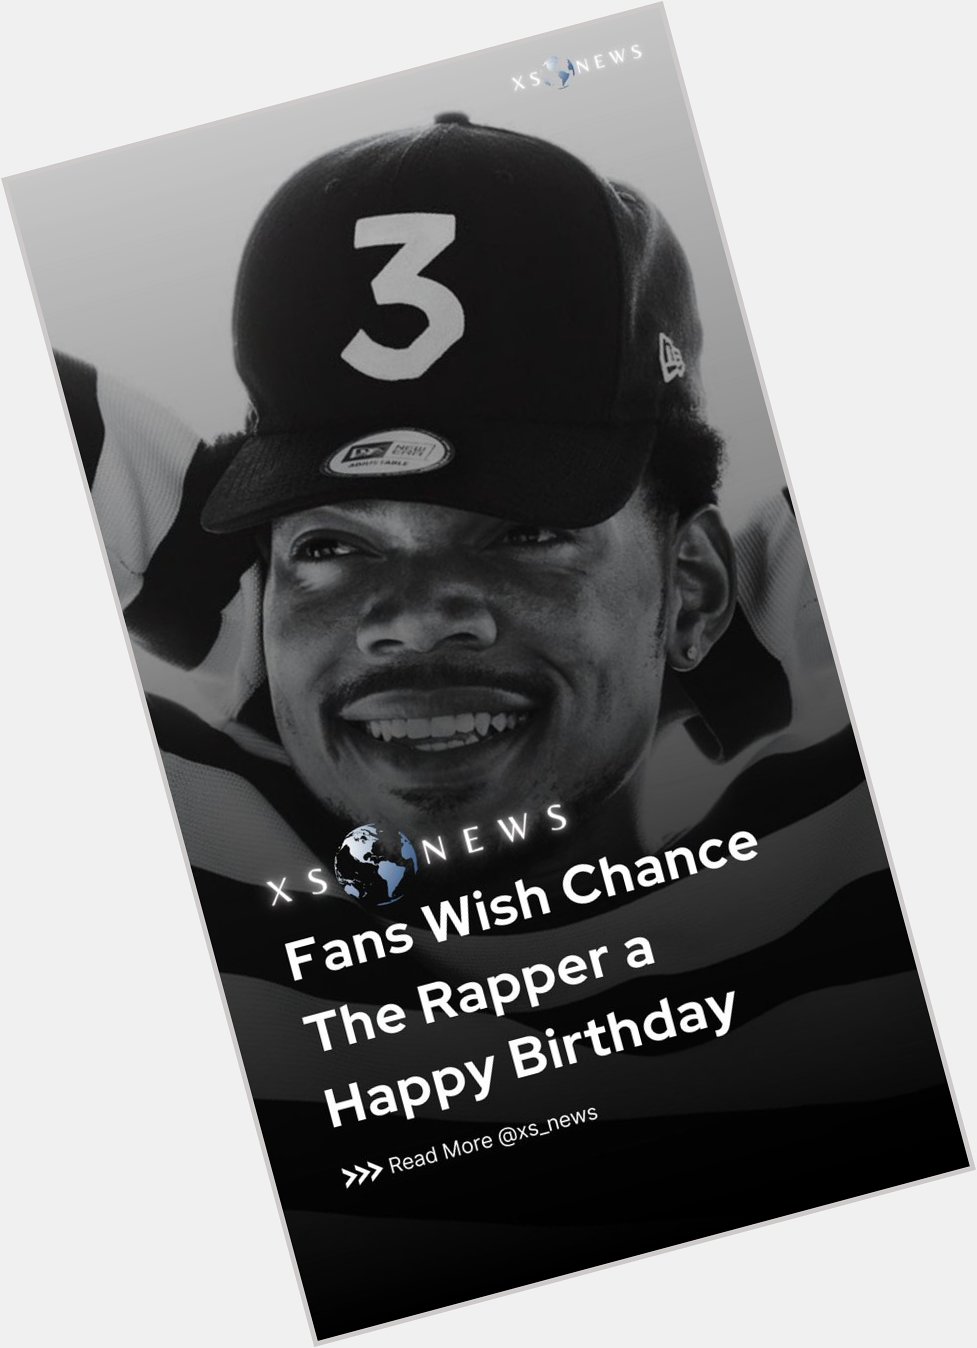 Fans Wish Chance The Rapper a Happy Birthday. 